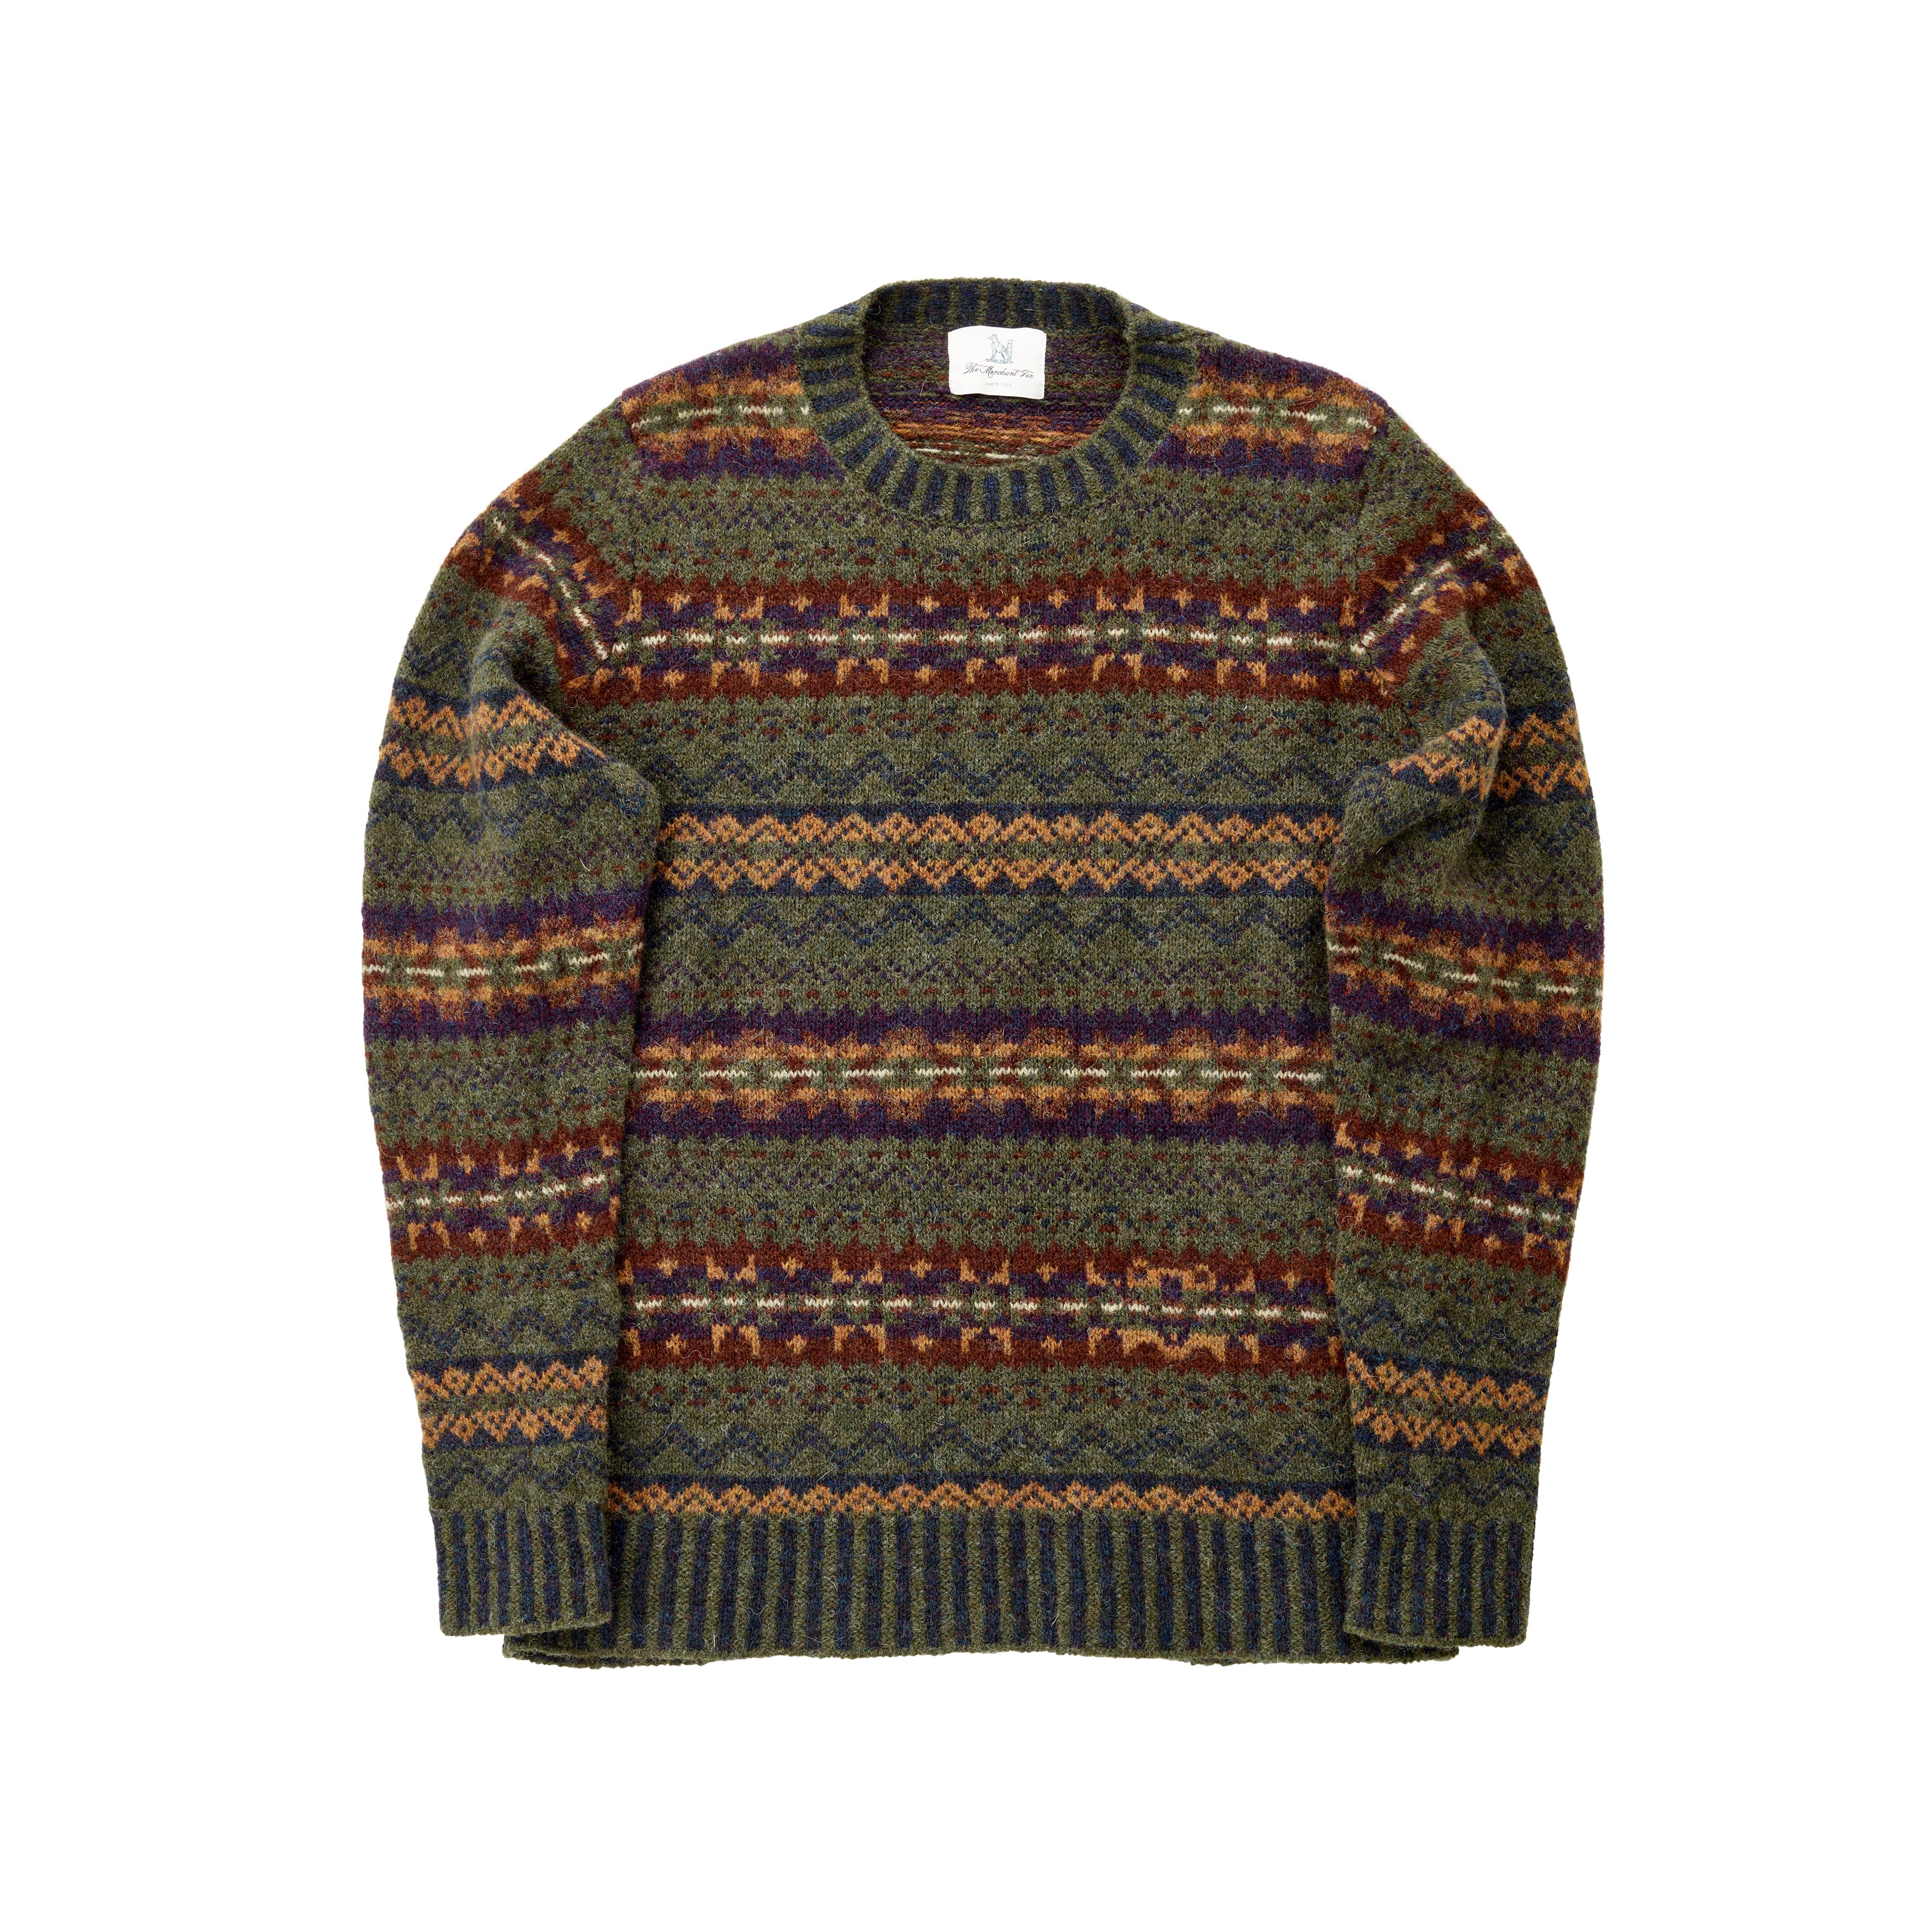 The Melrose Sweater in Forest